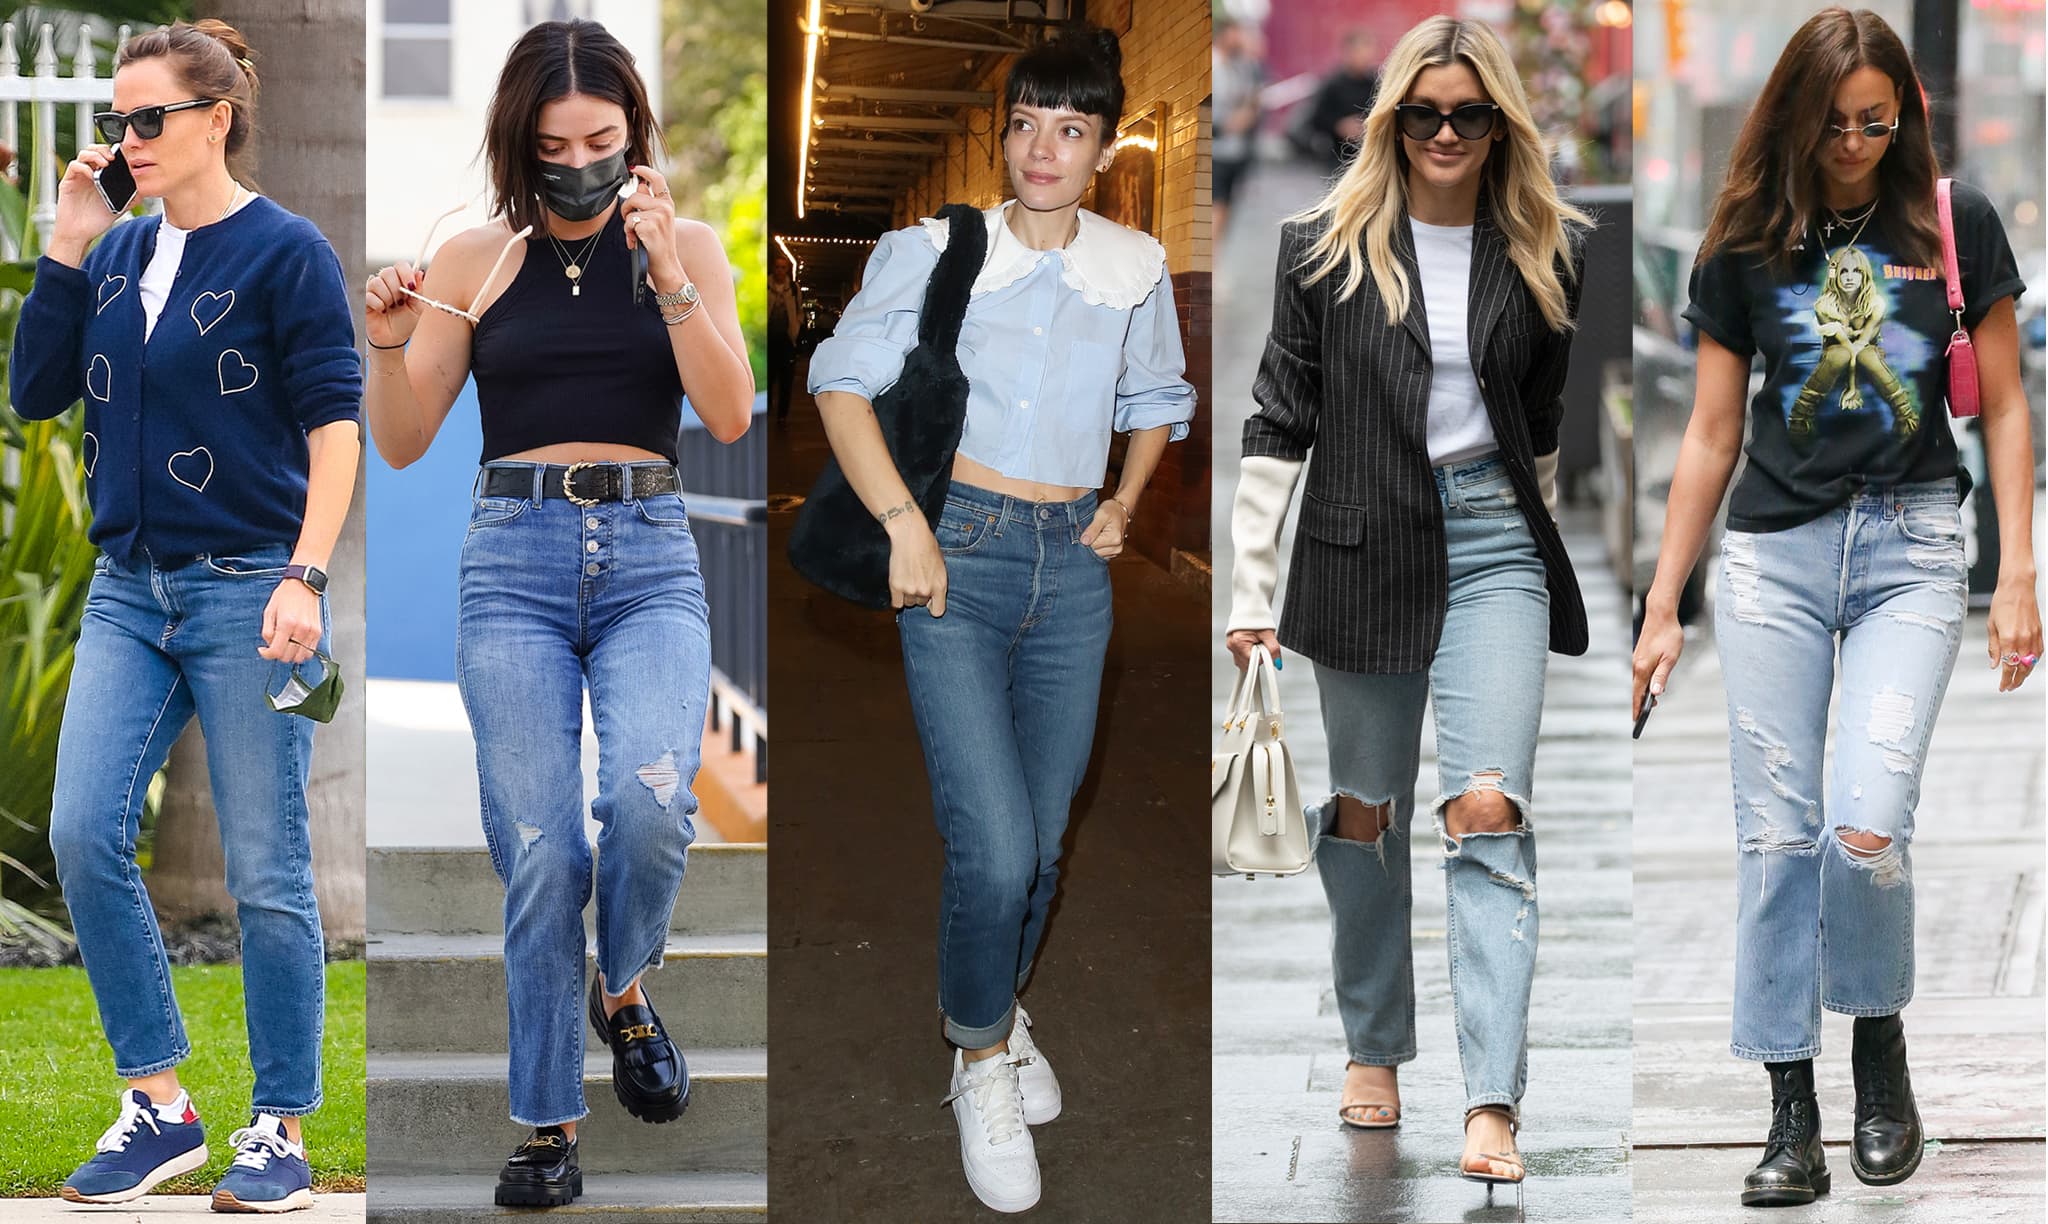 Jennifer Garner, Lucy Hale, Lily Allen, Ashley Roberts, and Irina Shayk show how to style mom jeans